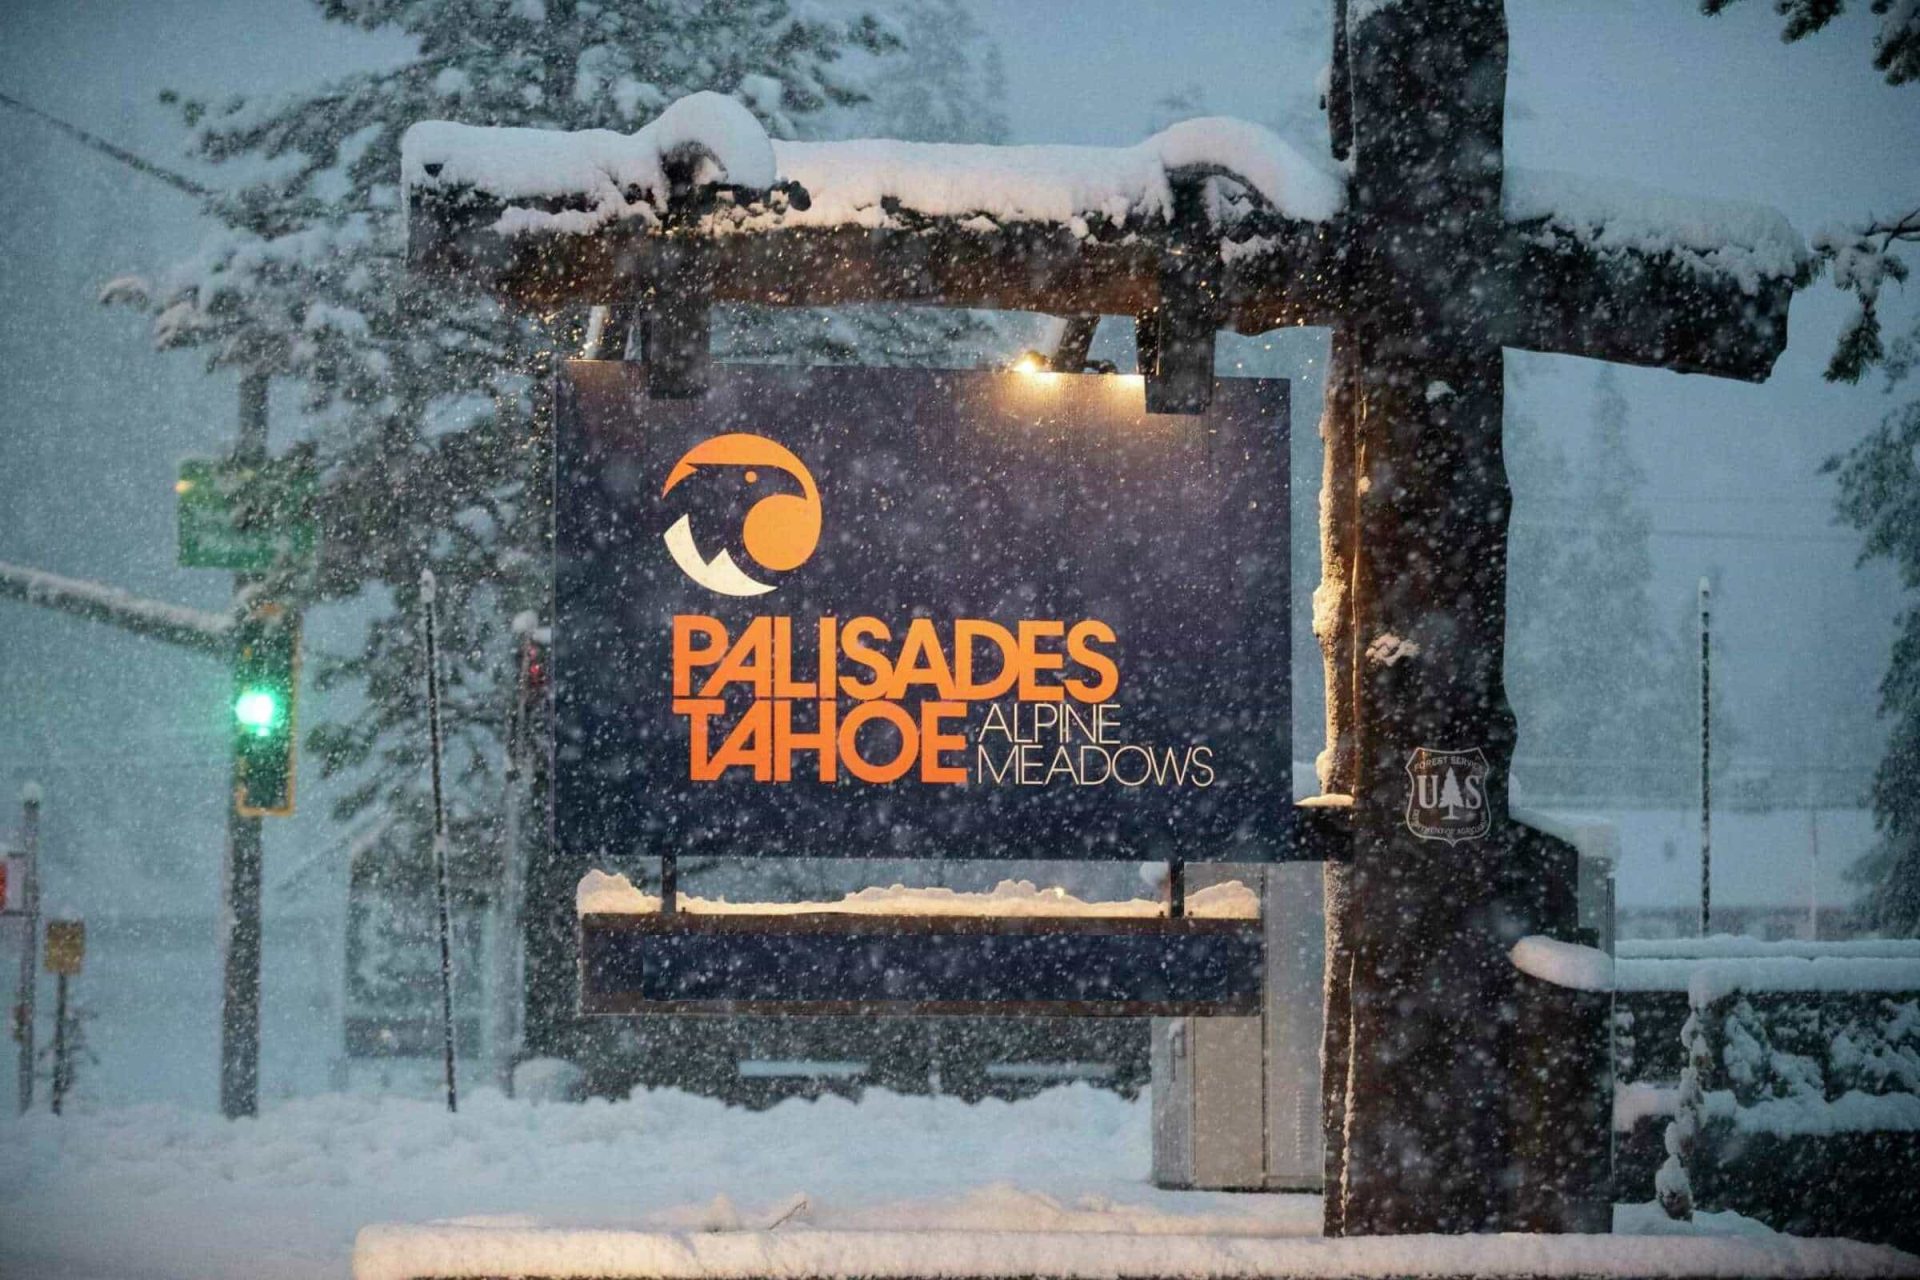 alpine meadows base area sing in the snow, Palisades Tahoe employee killed